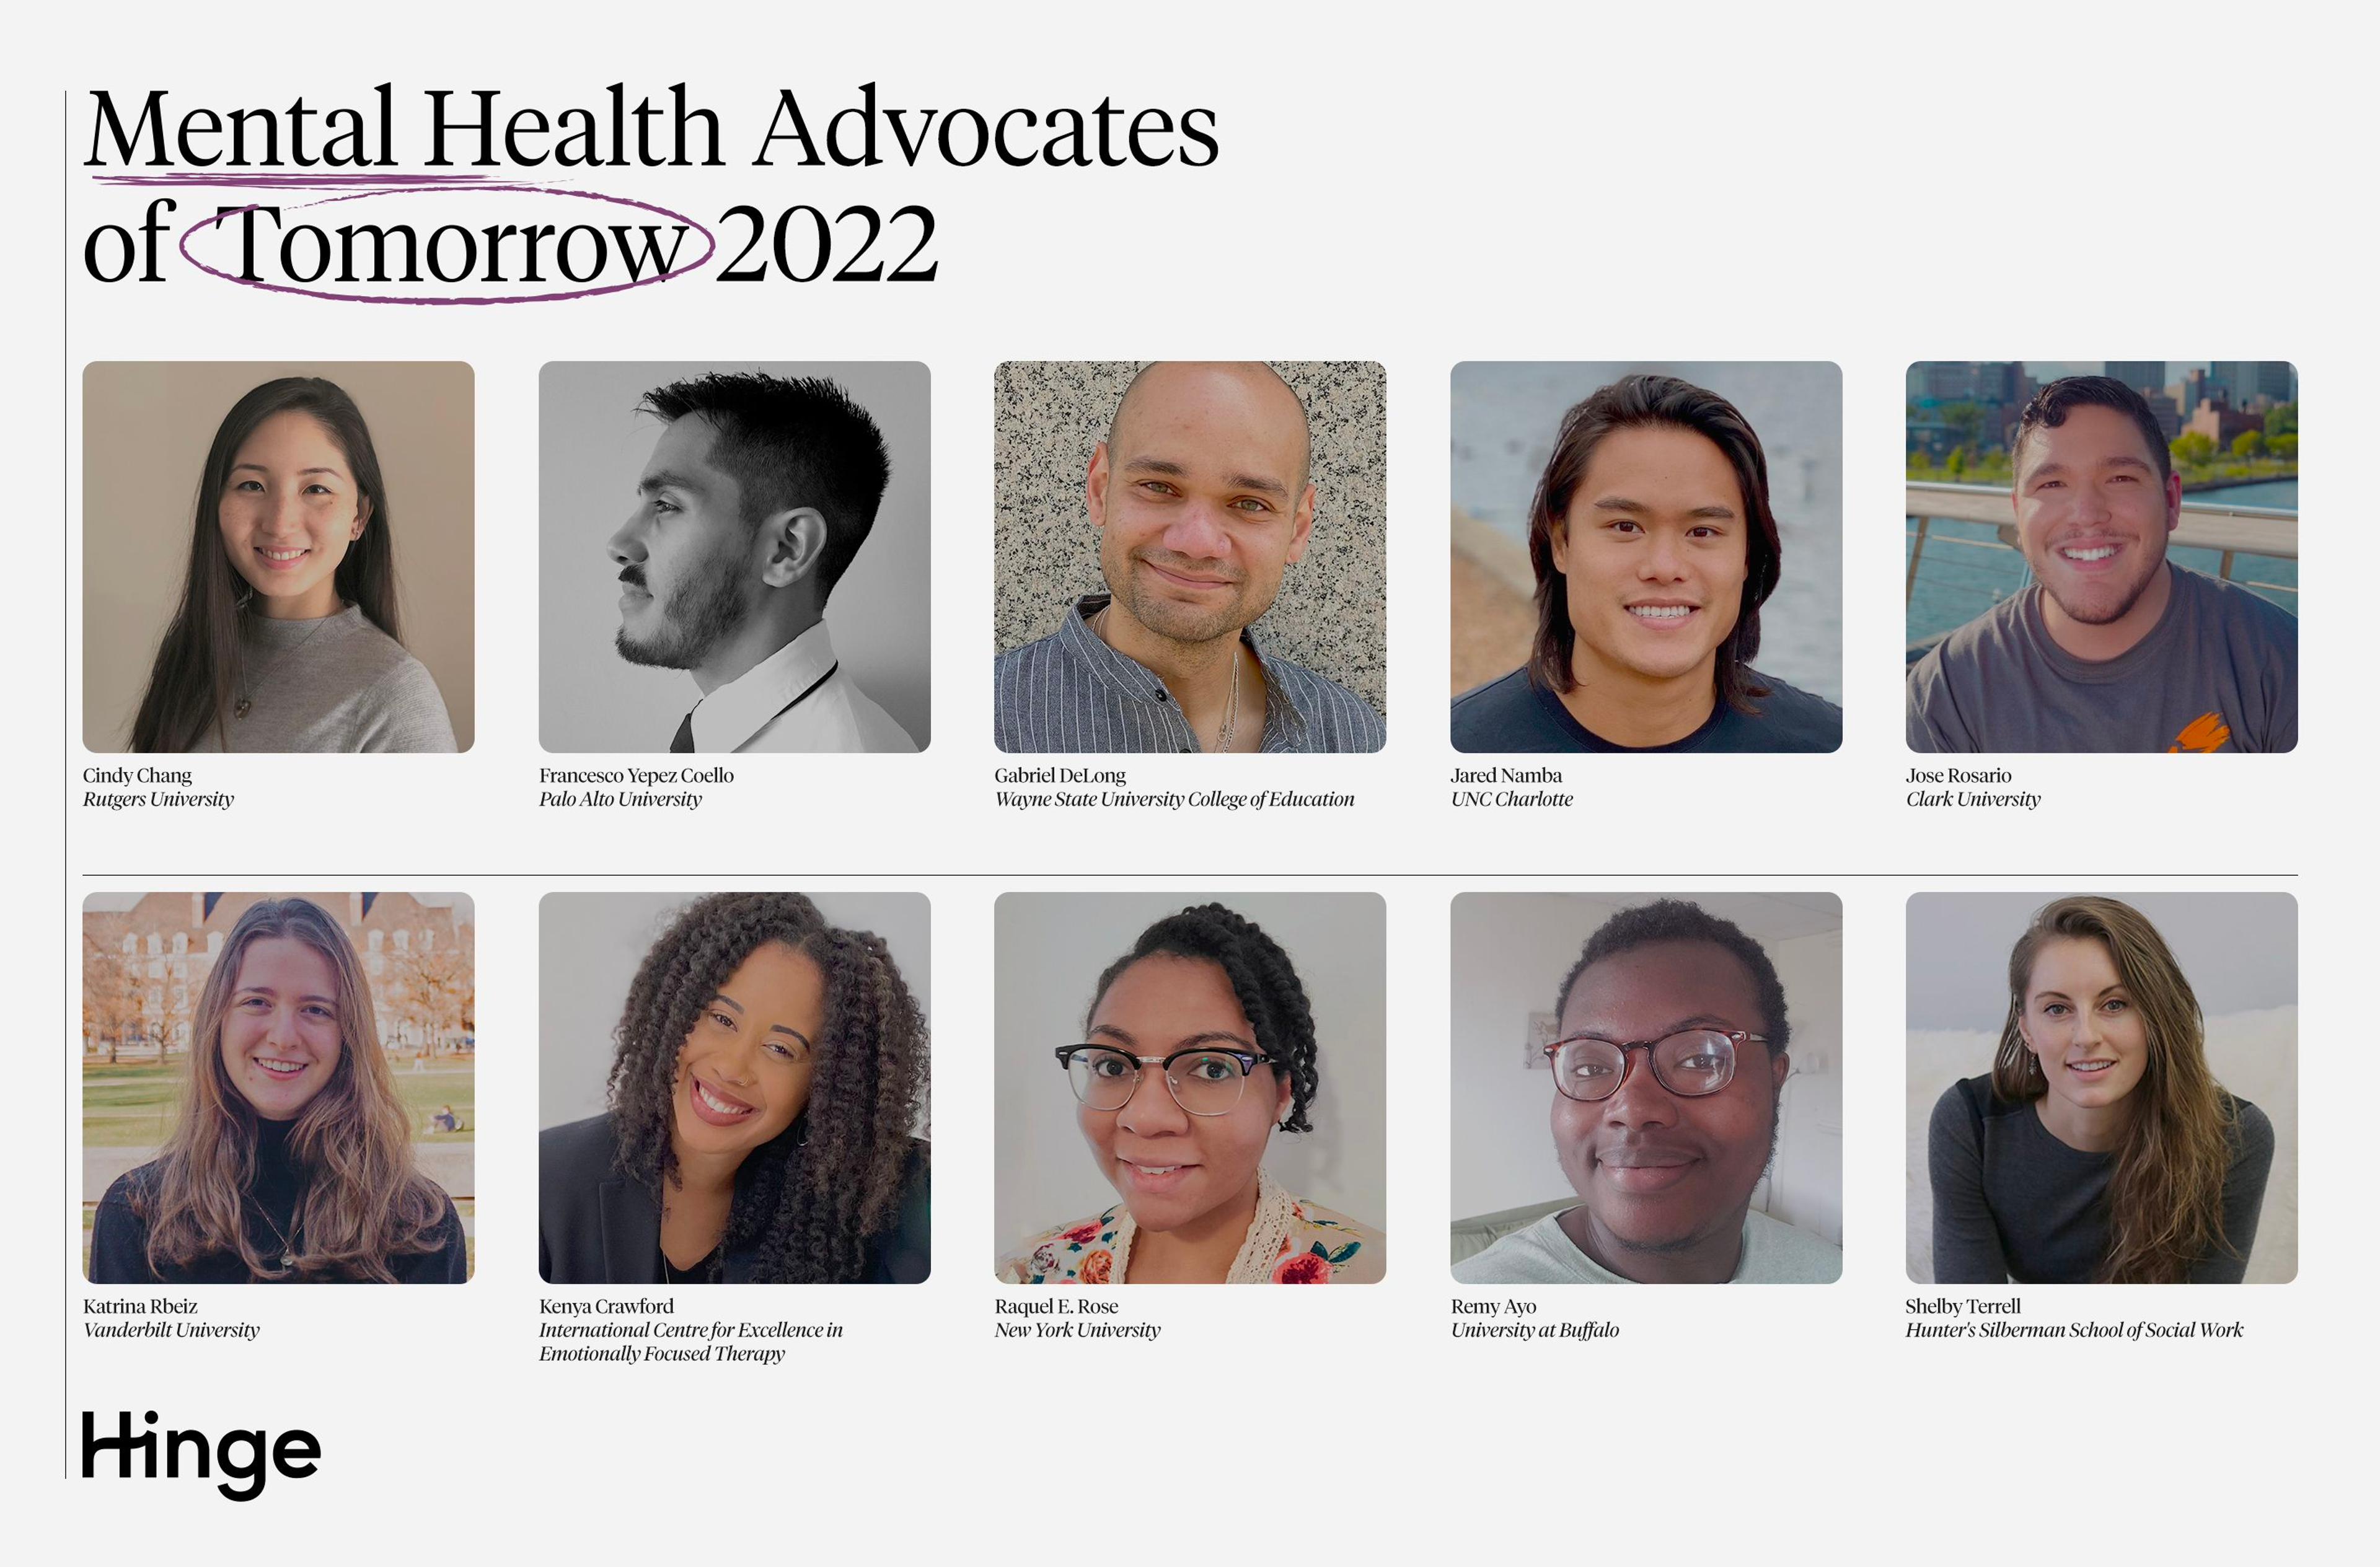 Grid of photos of the Mental Health Advocates of Tomorrow 2022